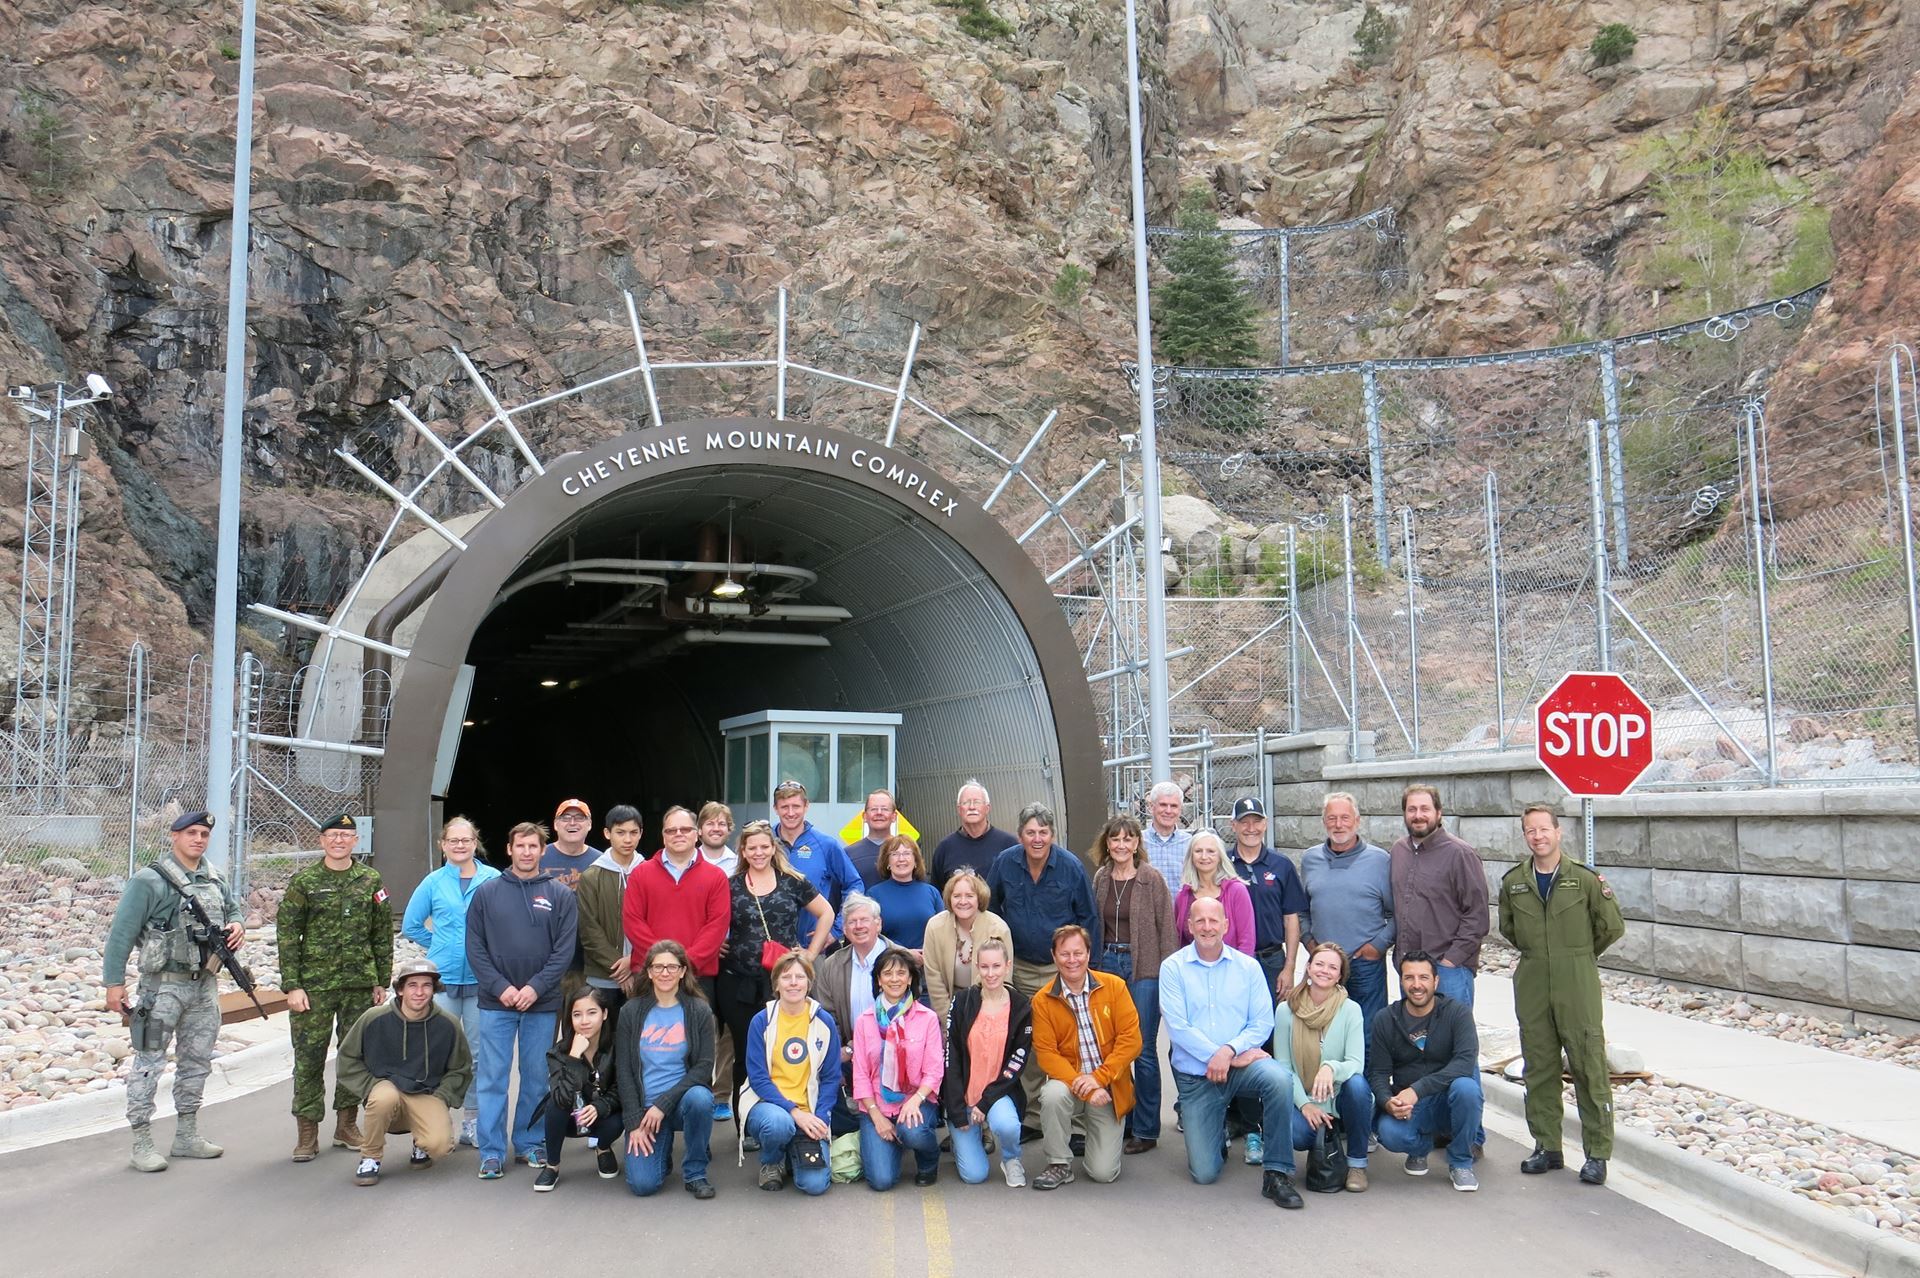 does cheyenne mountain give tours